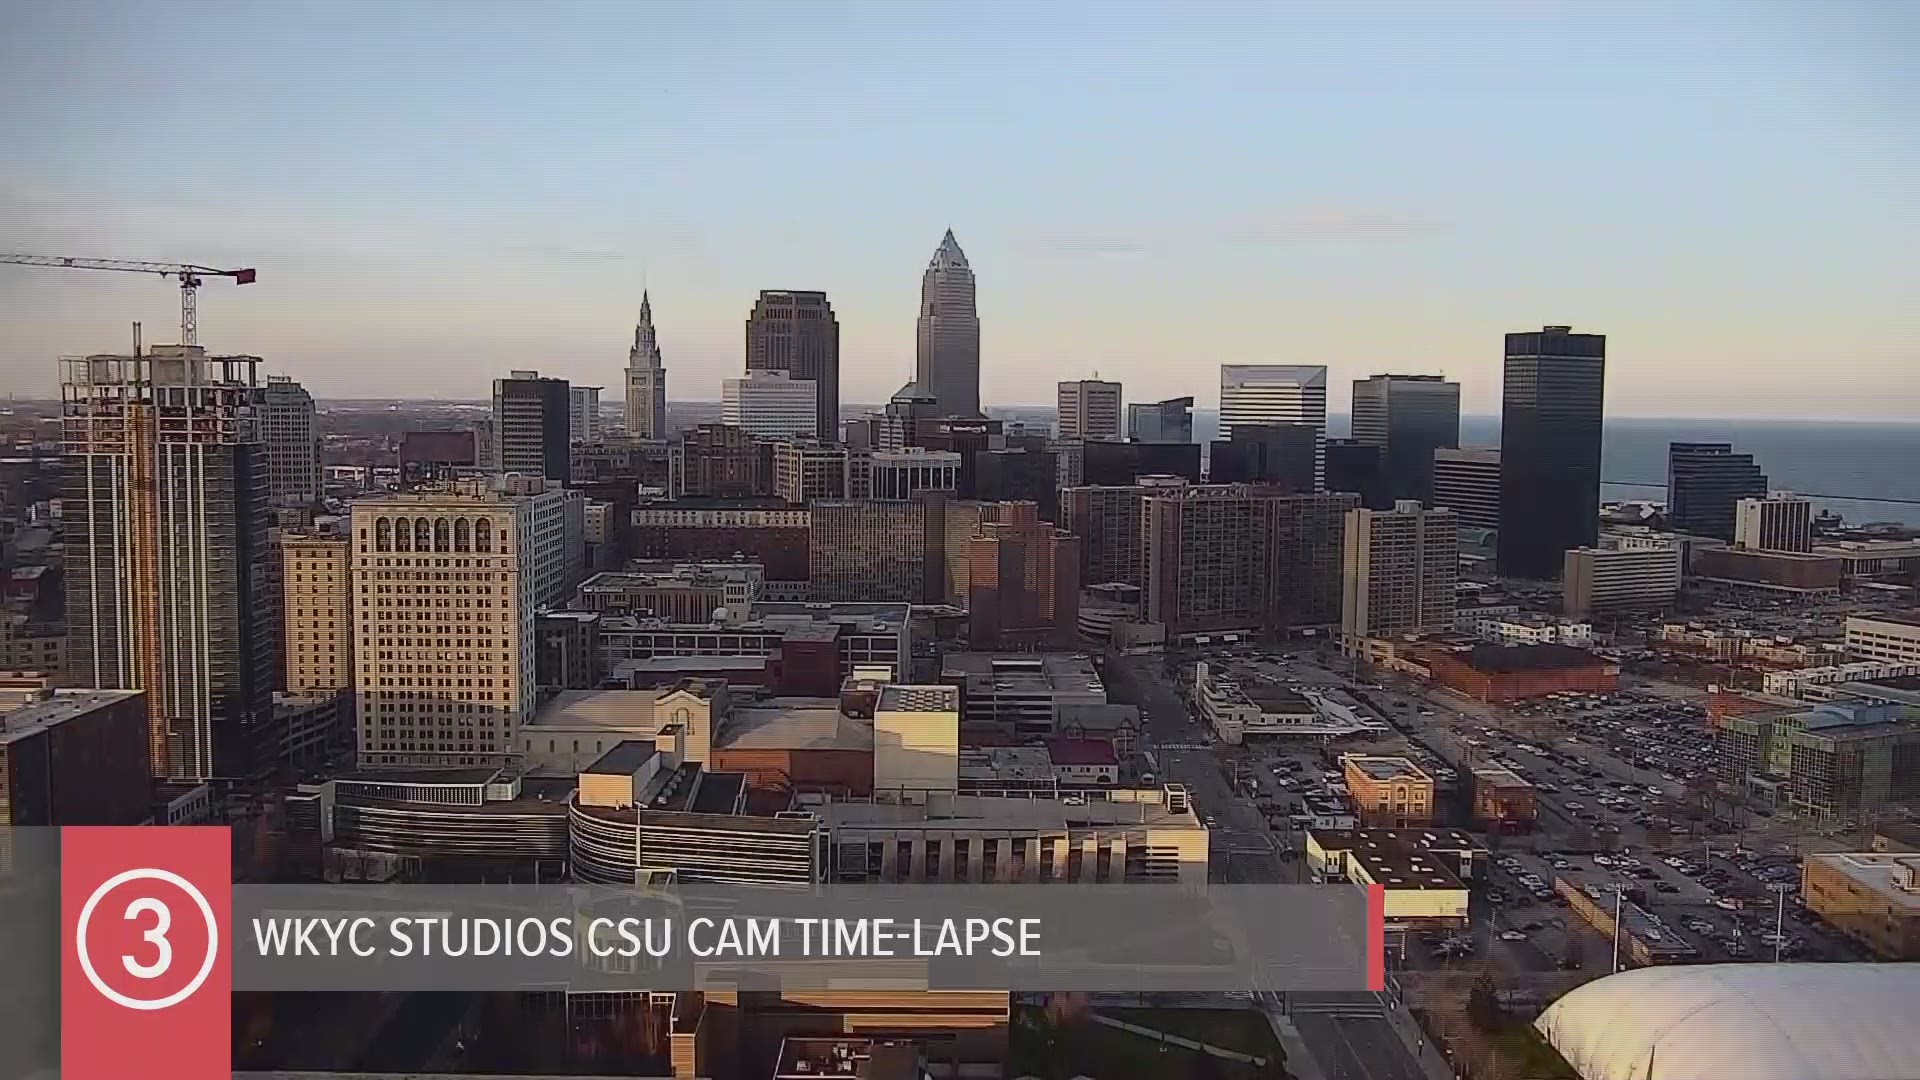 Take :30 seconds and enjoy our Monday time-lapse for January 6th from the WKYC Studios CSU Cam. #3weather